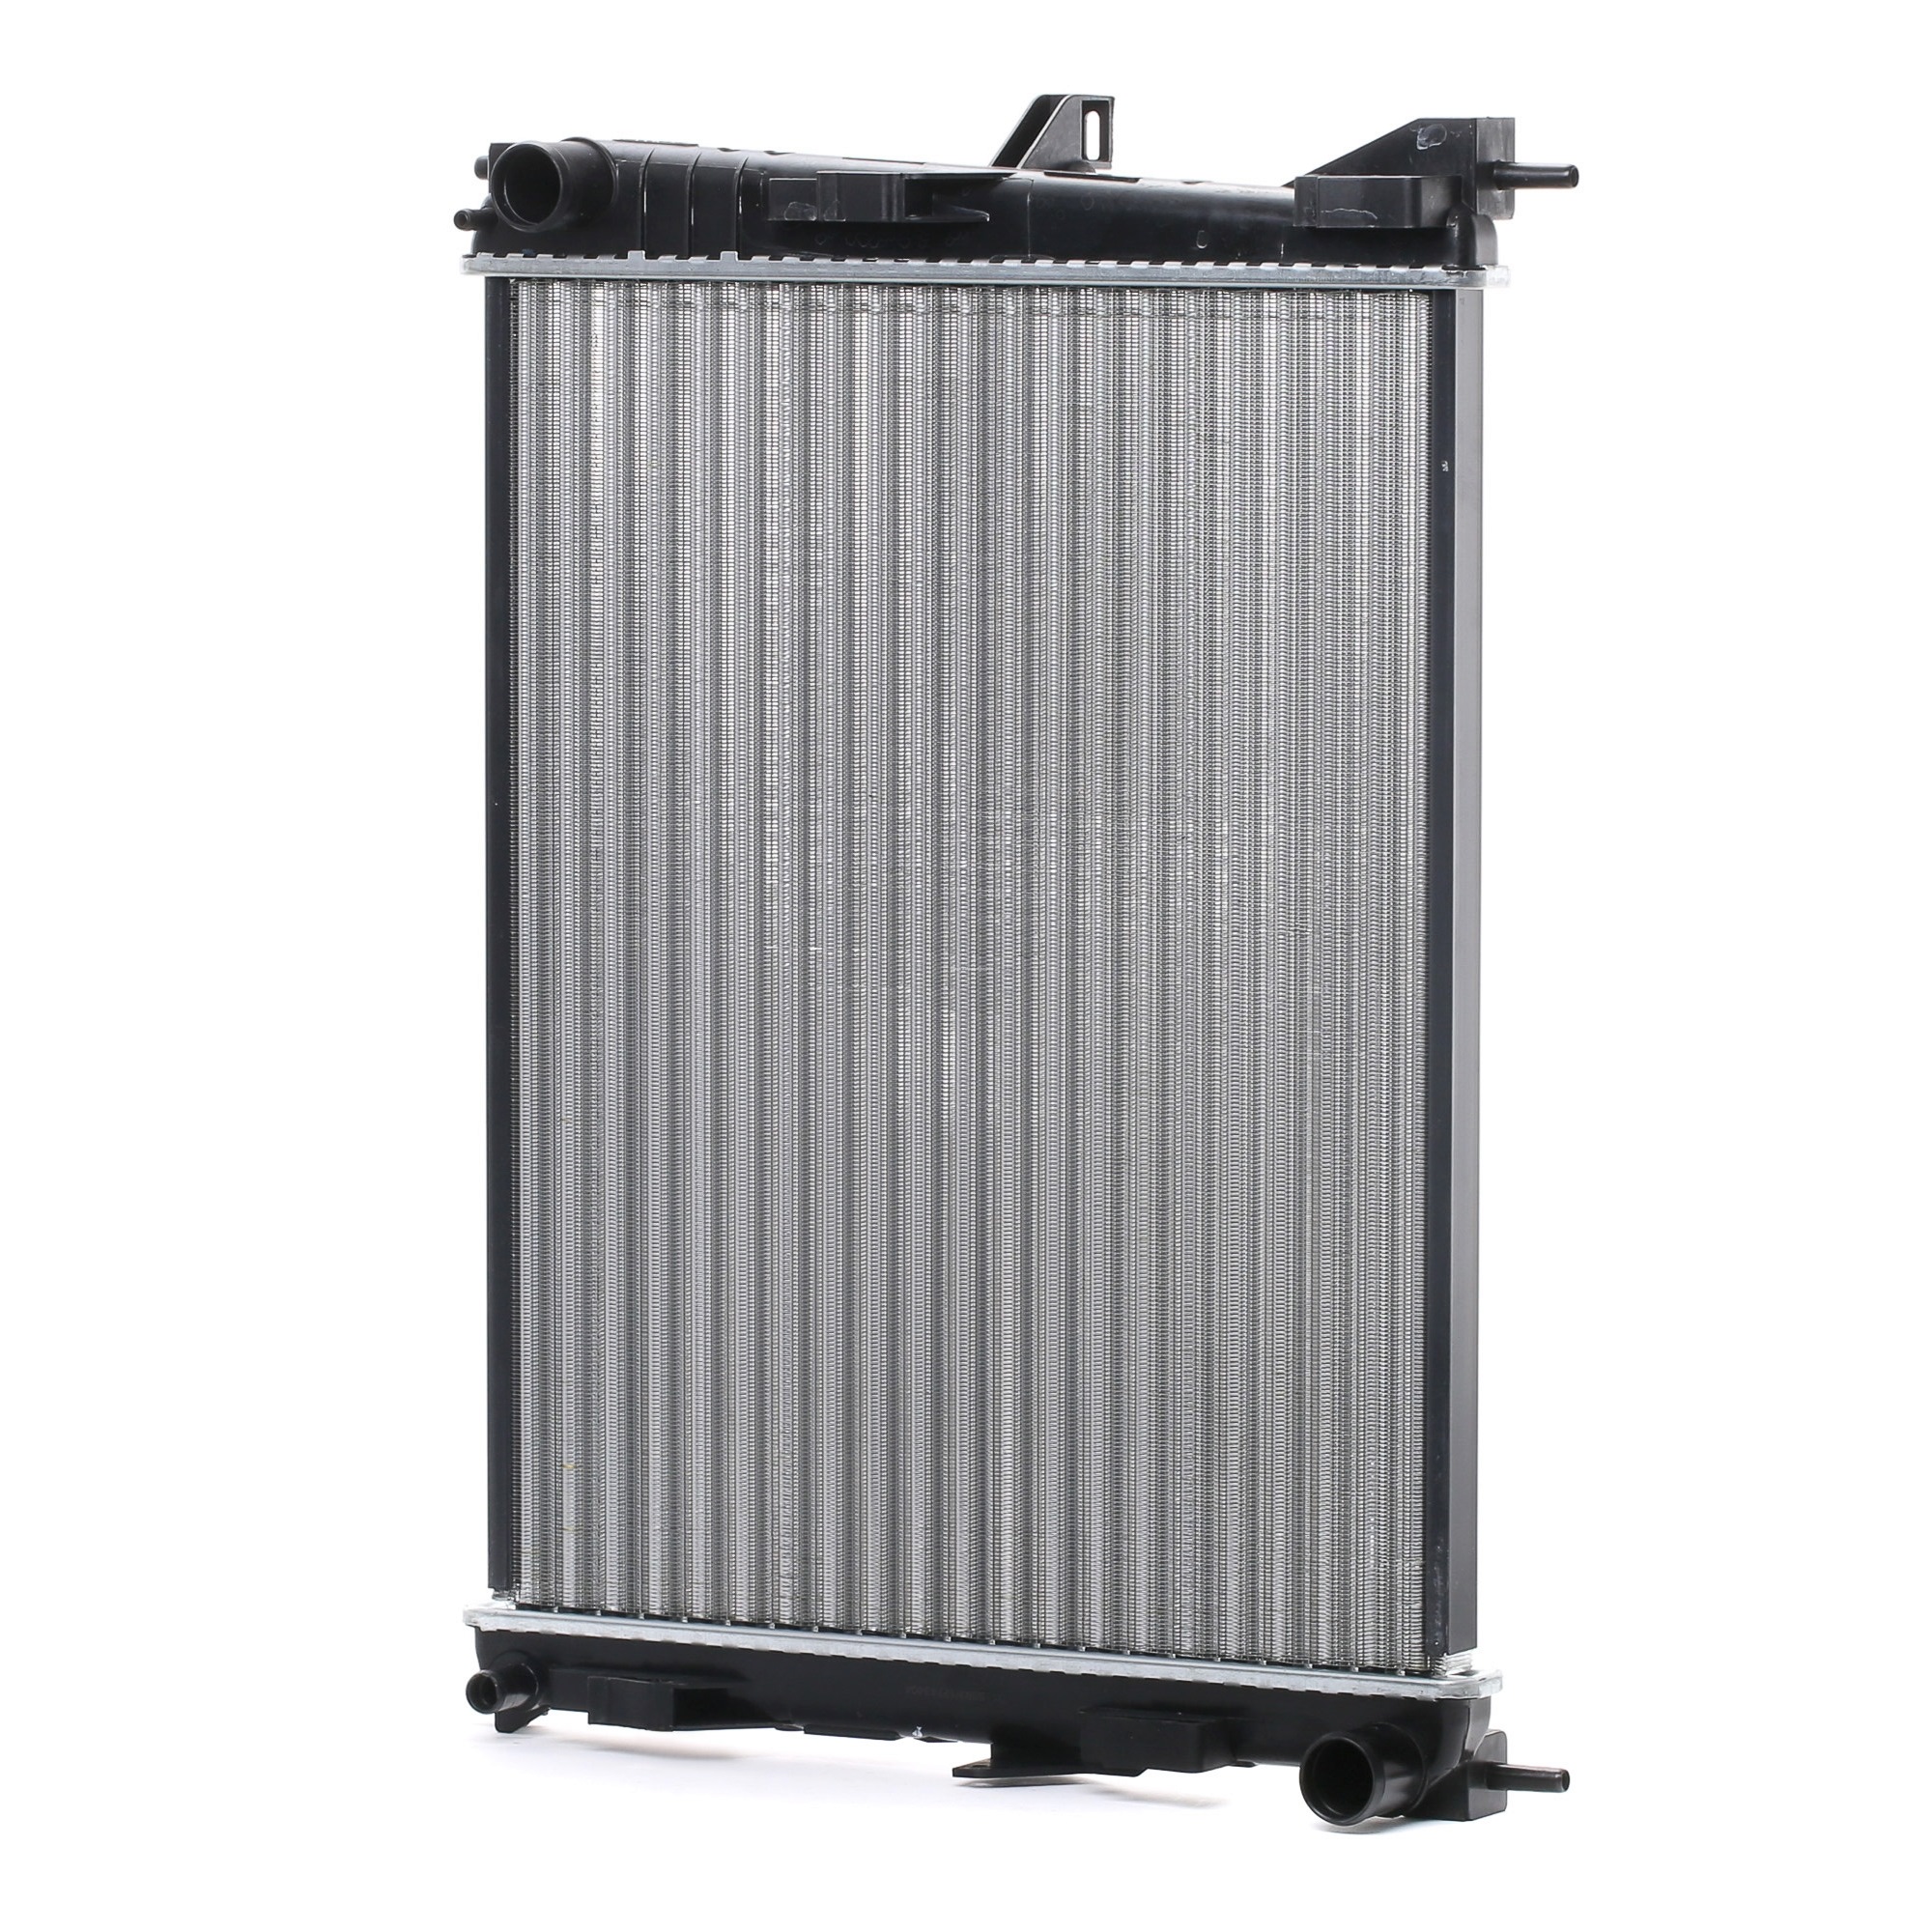 STARK SKRD-0120744 Engine radiator Aluminium, 495 x 396 x 23 mm, without frame, Mechanically jointed cooling fins